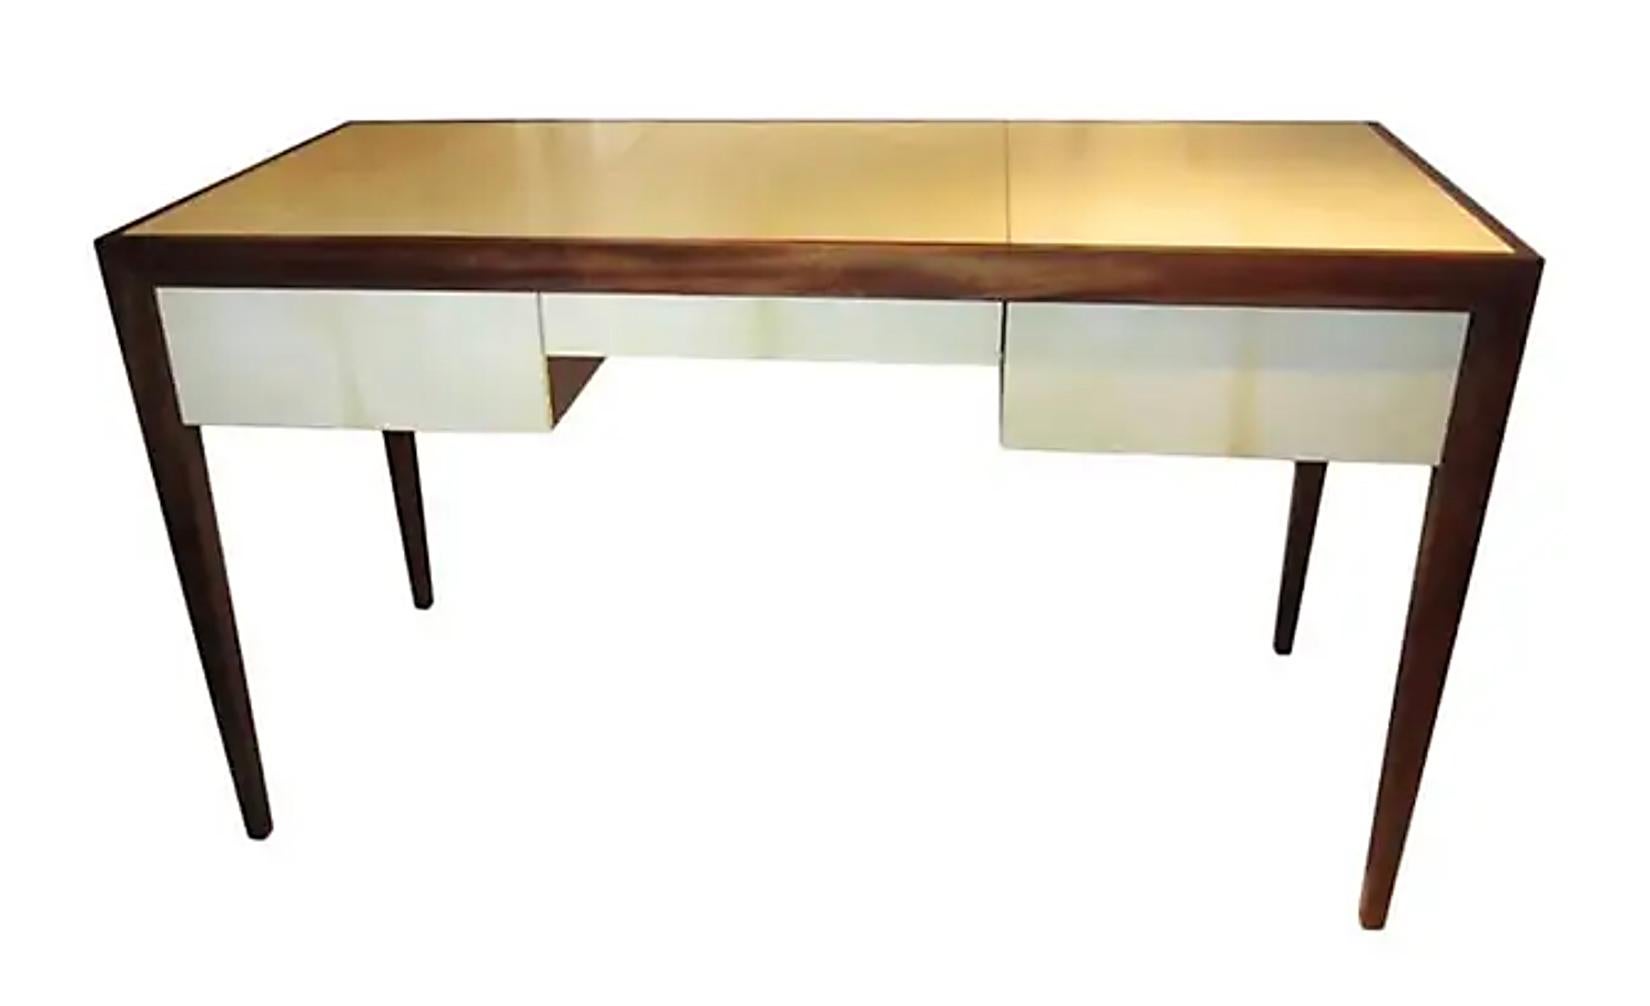 Custom parchment and mahogany writing desk. This desk is custom made. It can be crafted in your choice of wood and finish, mahogany, cerused oak, parchment top, shagreen etc. Lead Time is 8-10 weeks.